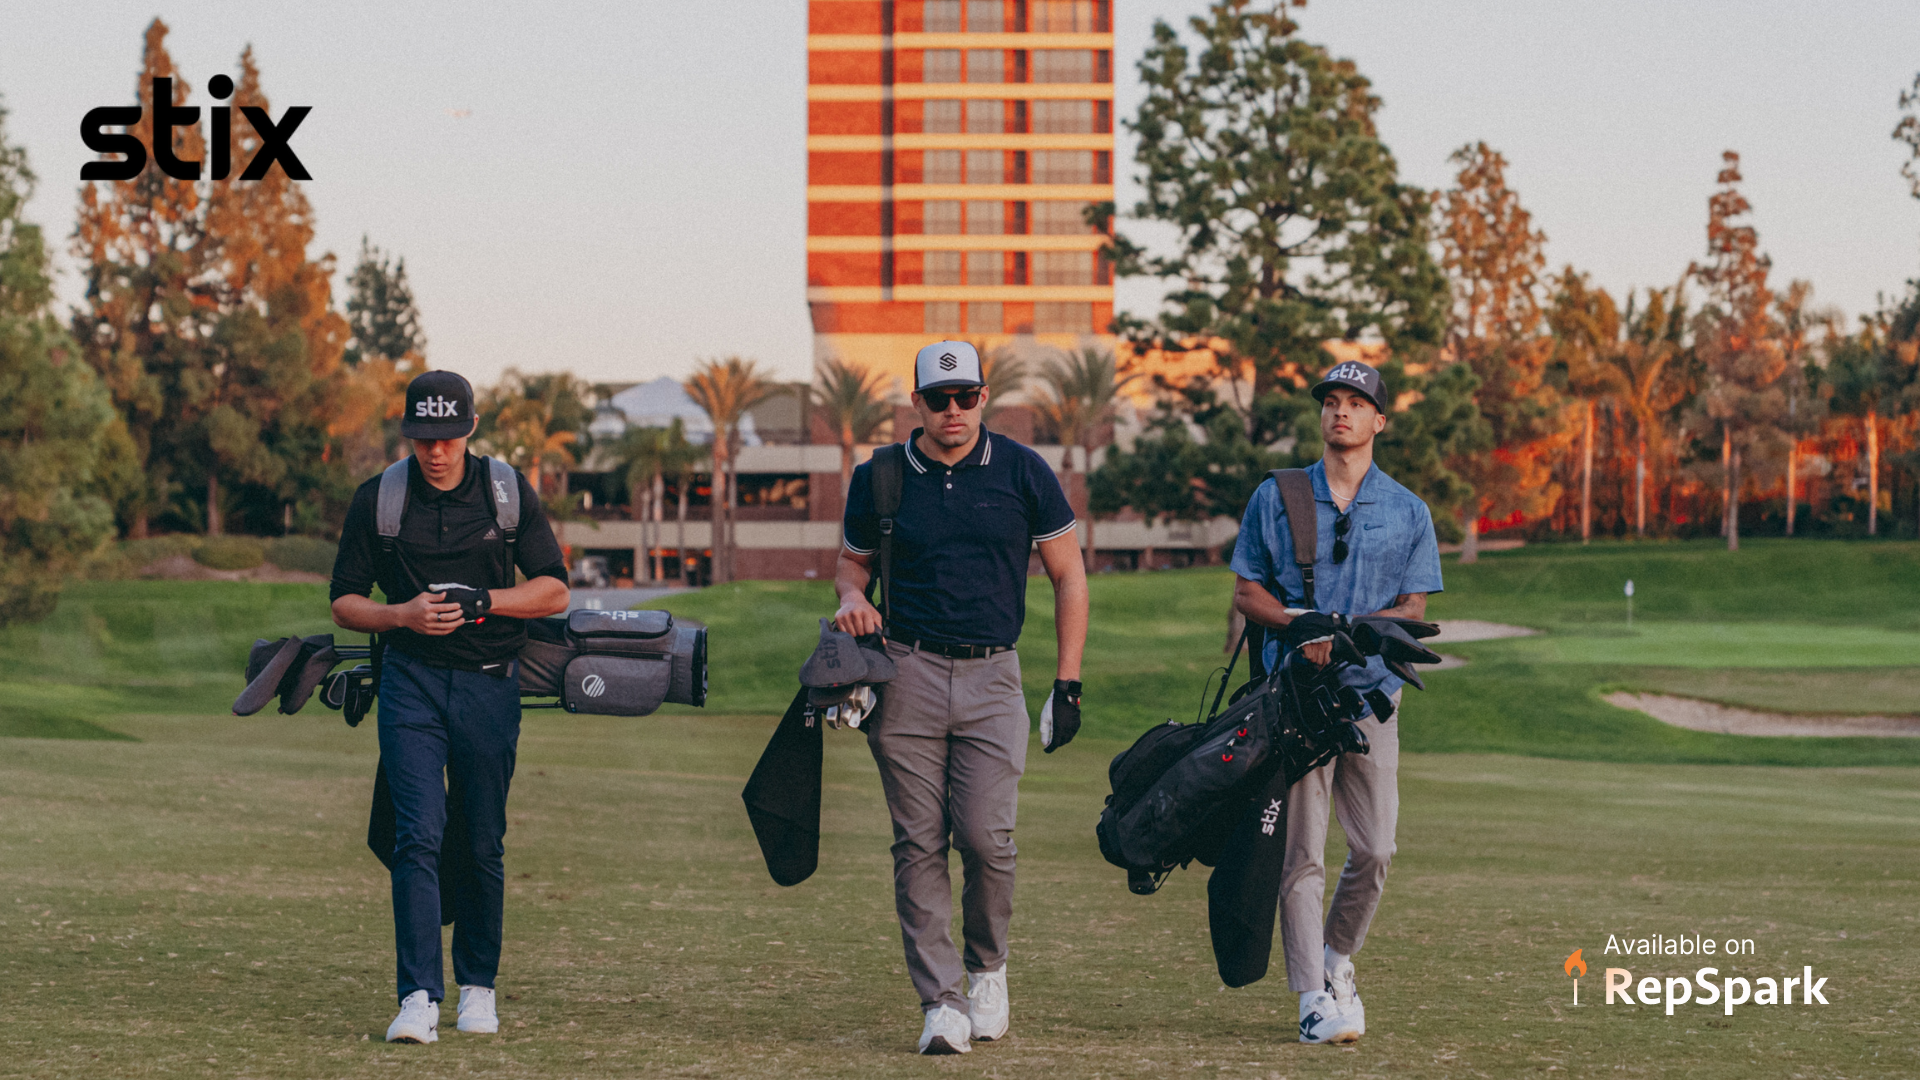 Three young adult males walking together on a golf course in the evening with their Stix Golf bags.